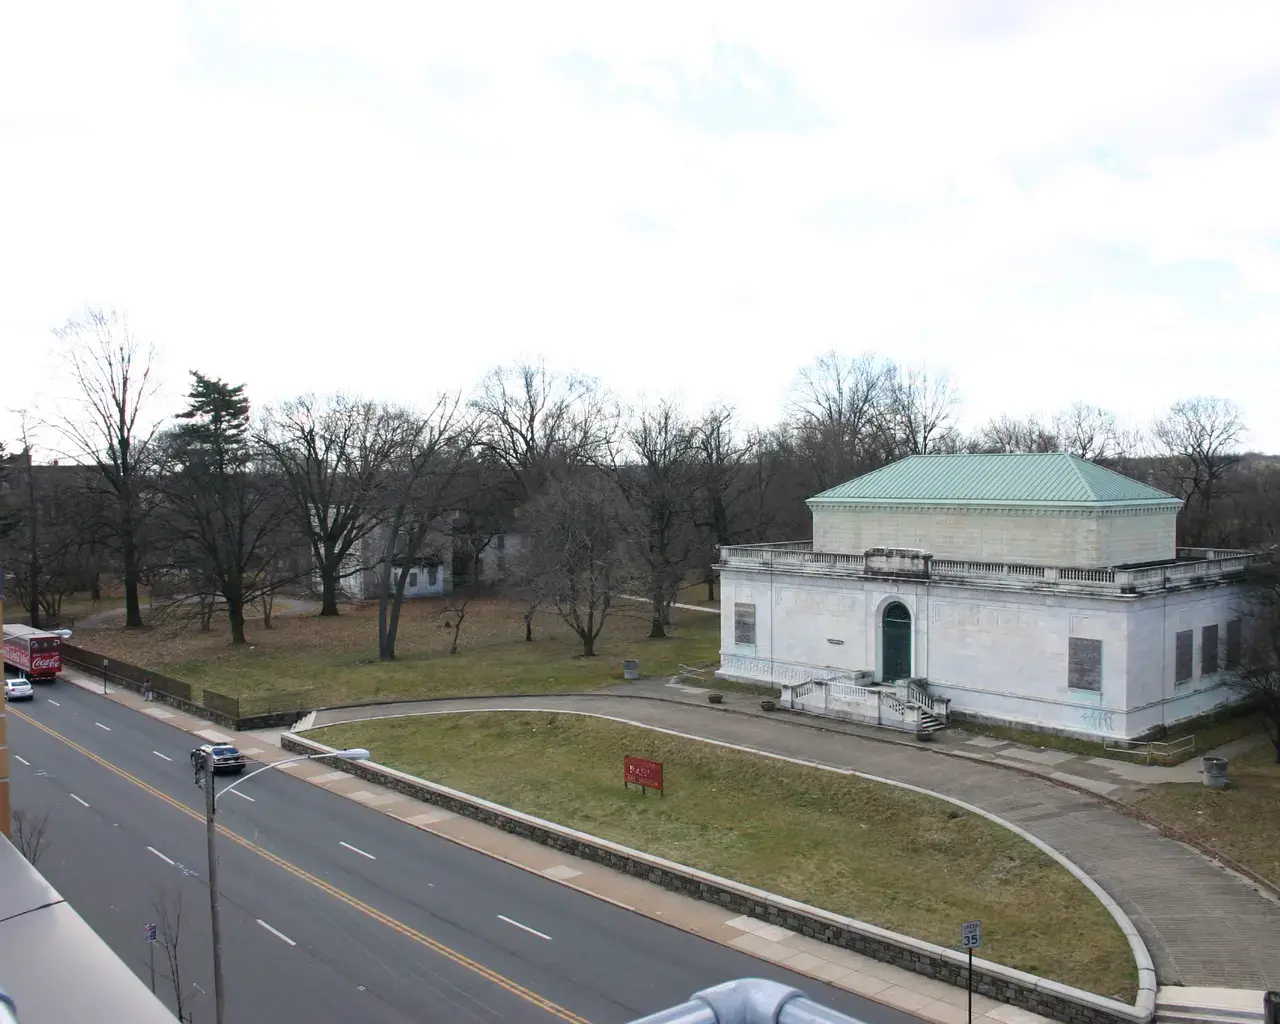 The Deshong Museum. Photo courtesy of the Pennsylvania Humanities Council.